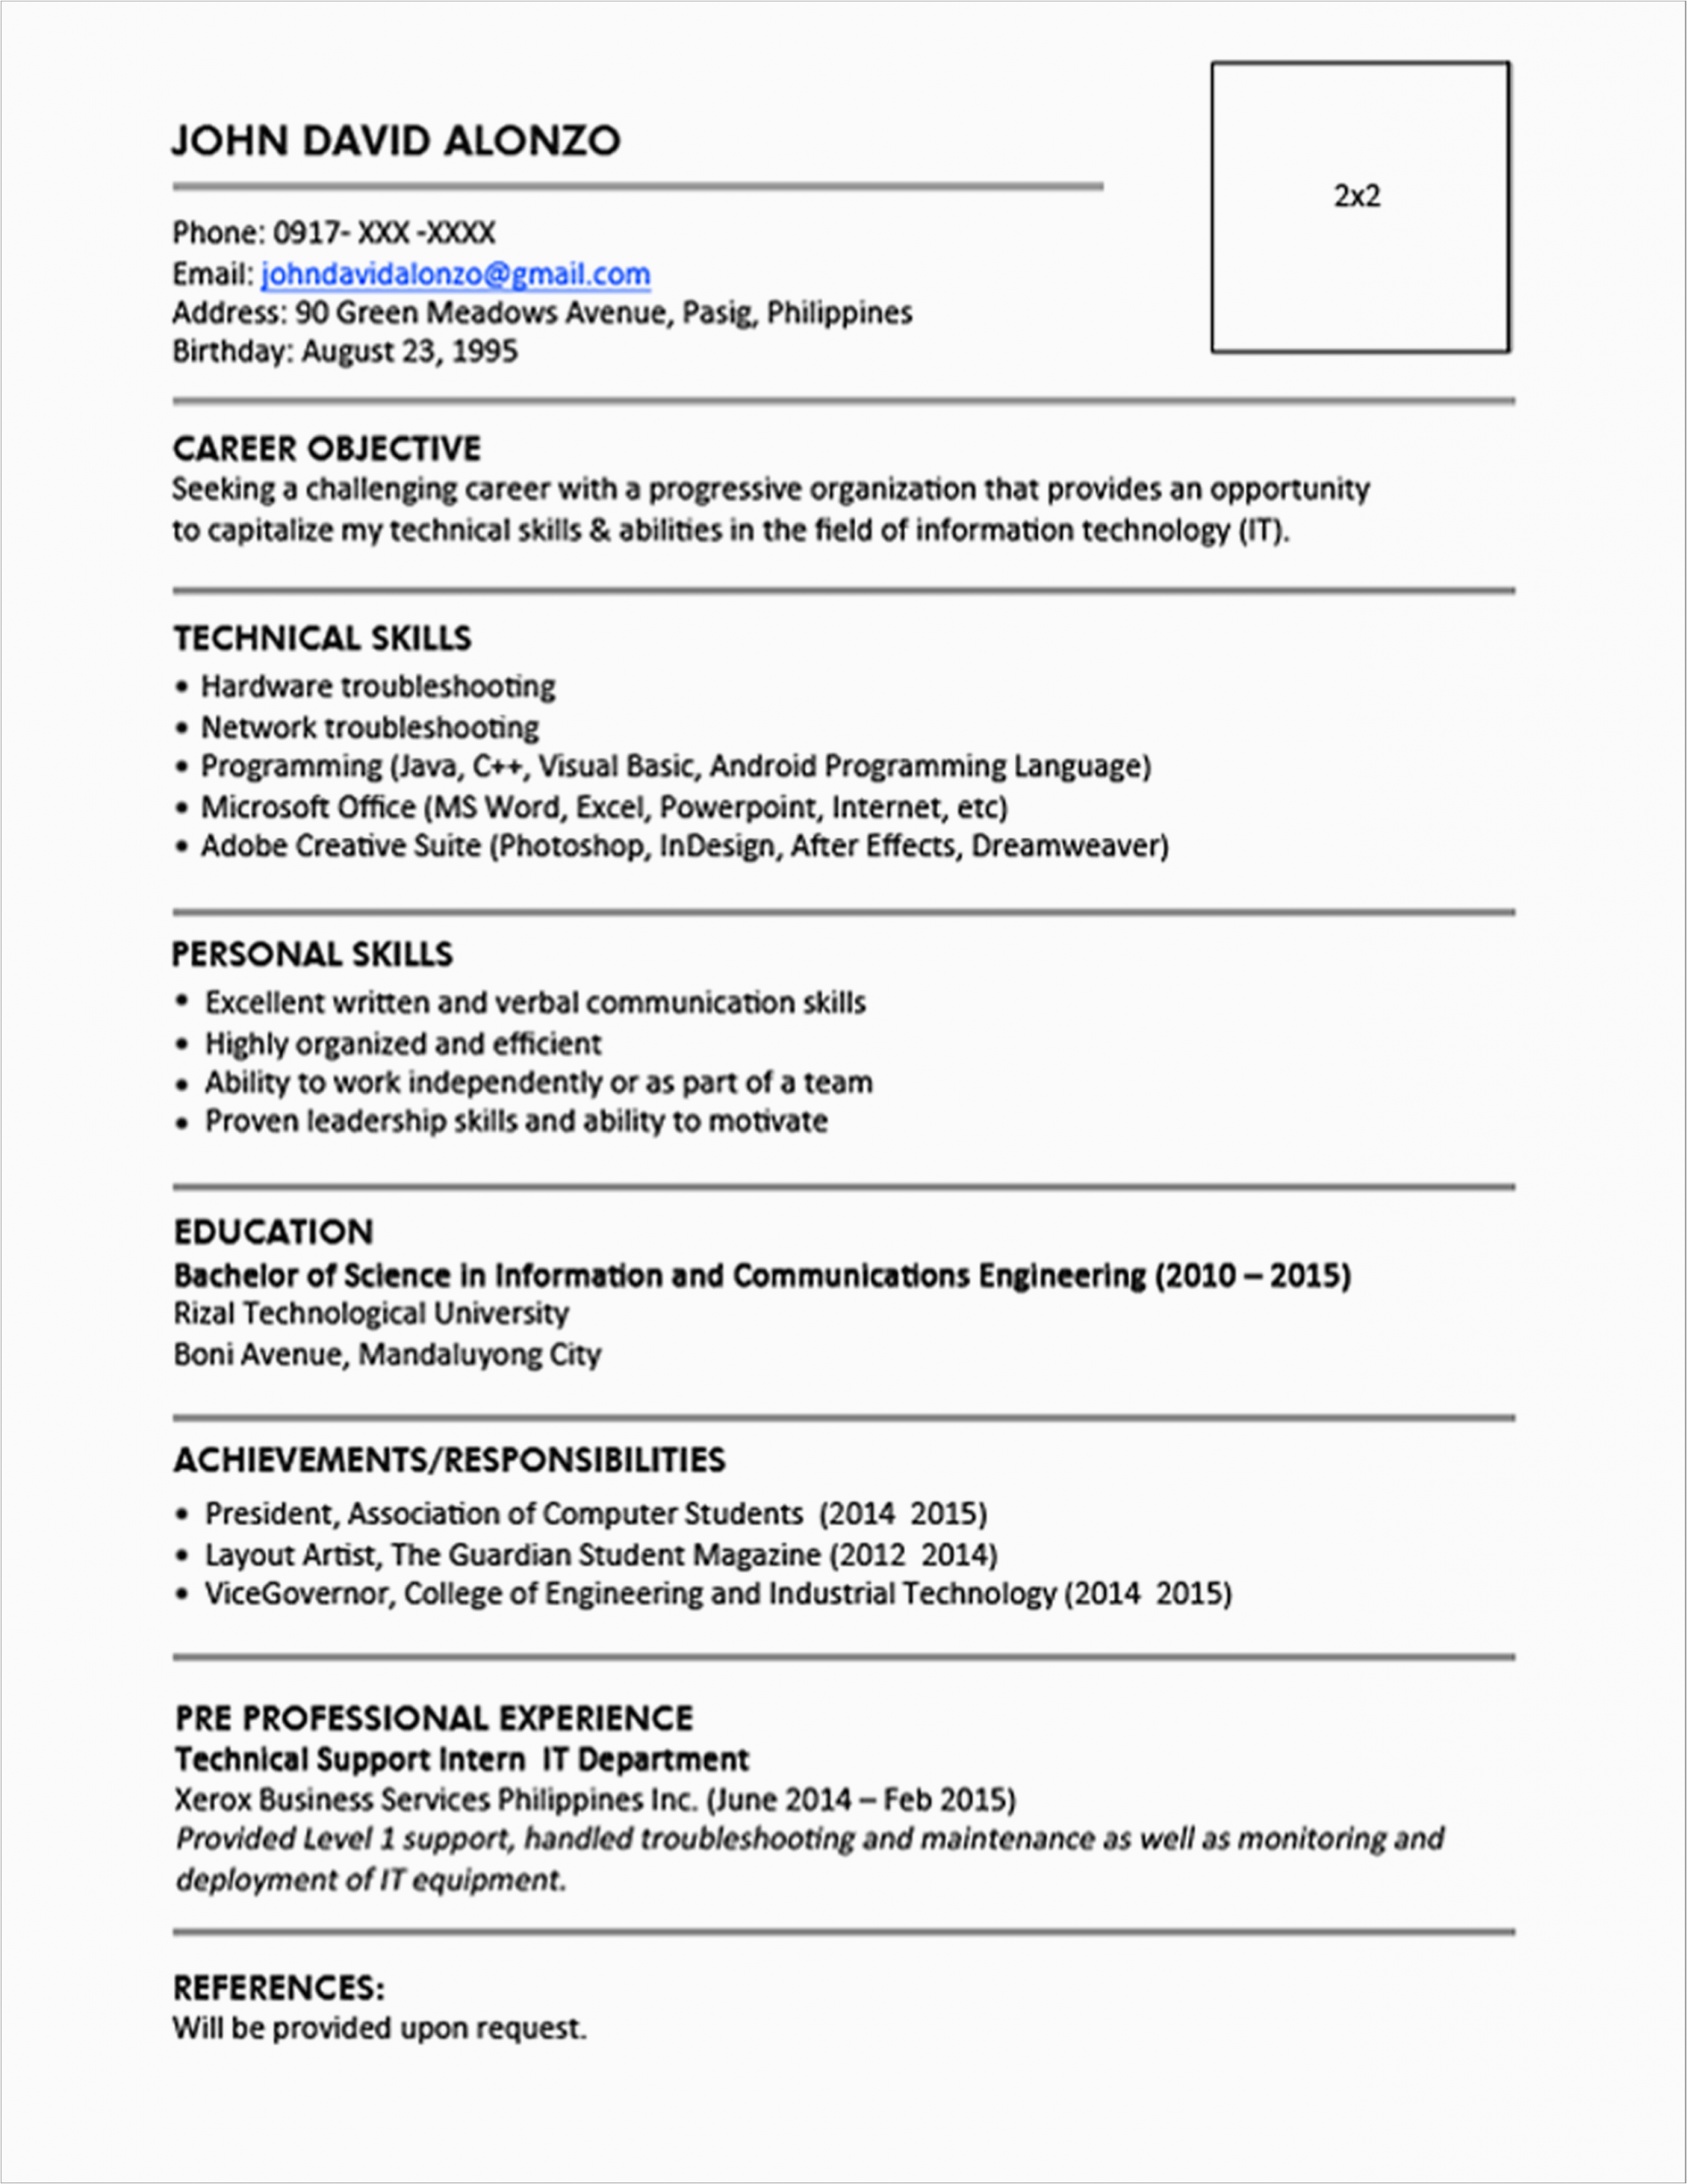 Resume Template Free Download for Fresh Graduate Student Sample Resume for Fresh Graduate Engineering